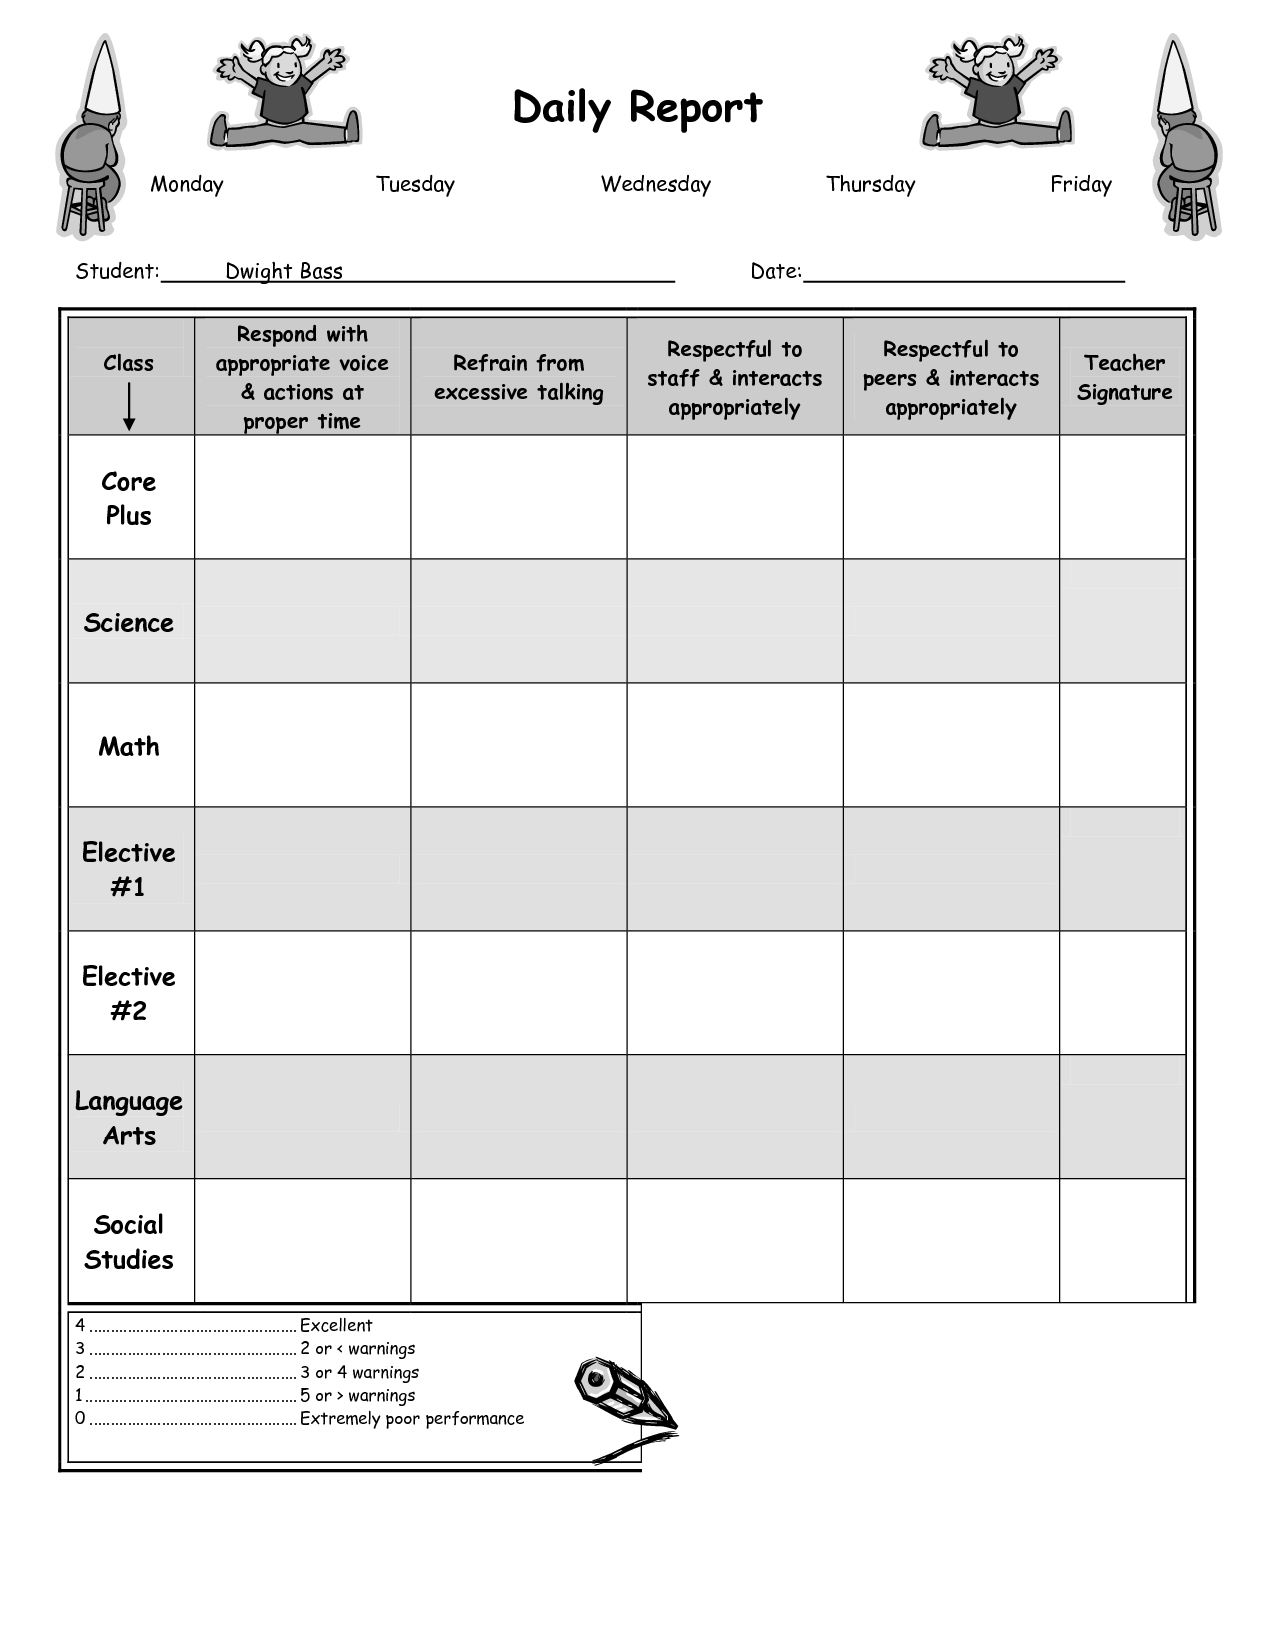 Daily Report Card Template For Adhd - Best Professional Inside Daily Report Card Template For Adhd